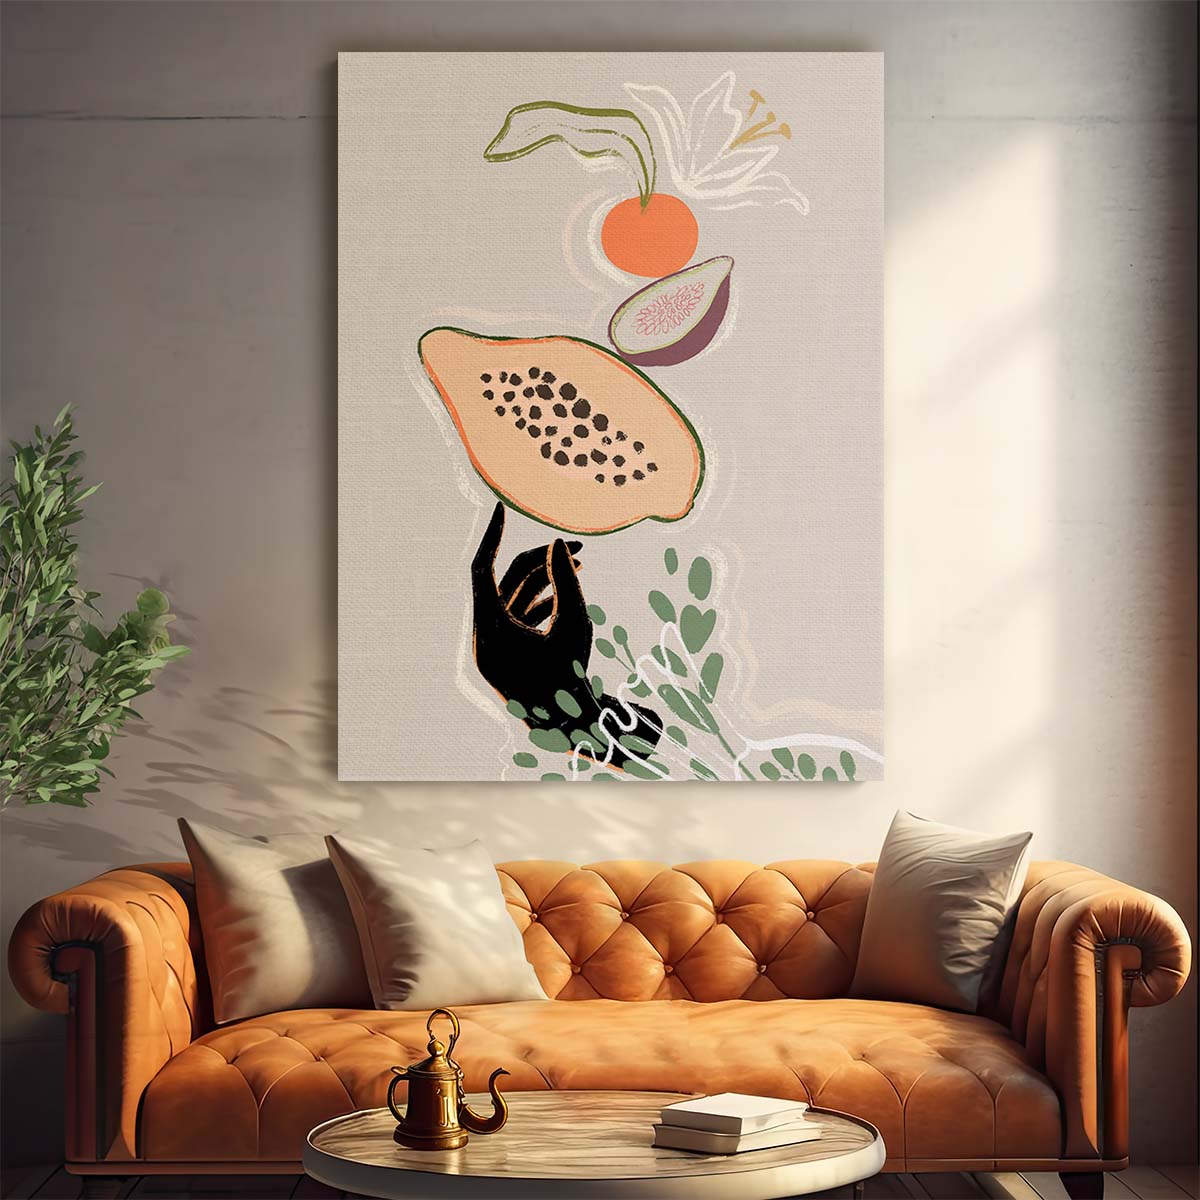 Colorful Boho Illustration of Woman Balancing Fresh Fruits in Kitchen by Luxuriance Designs, made in USA